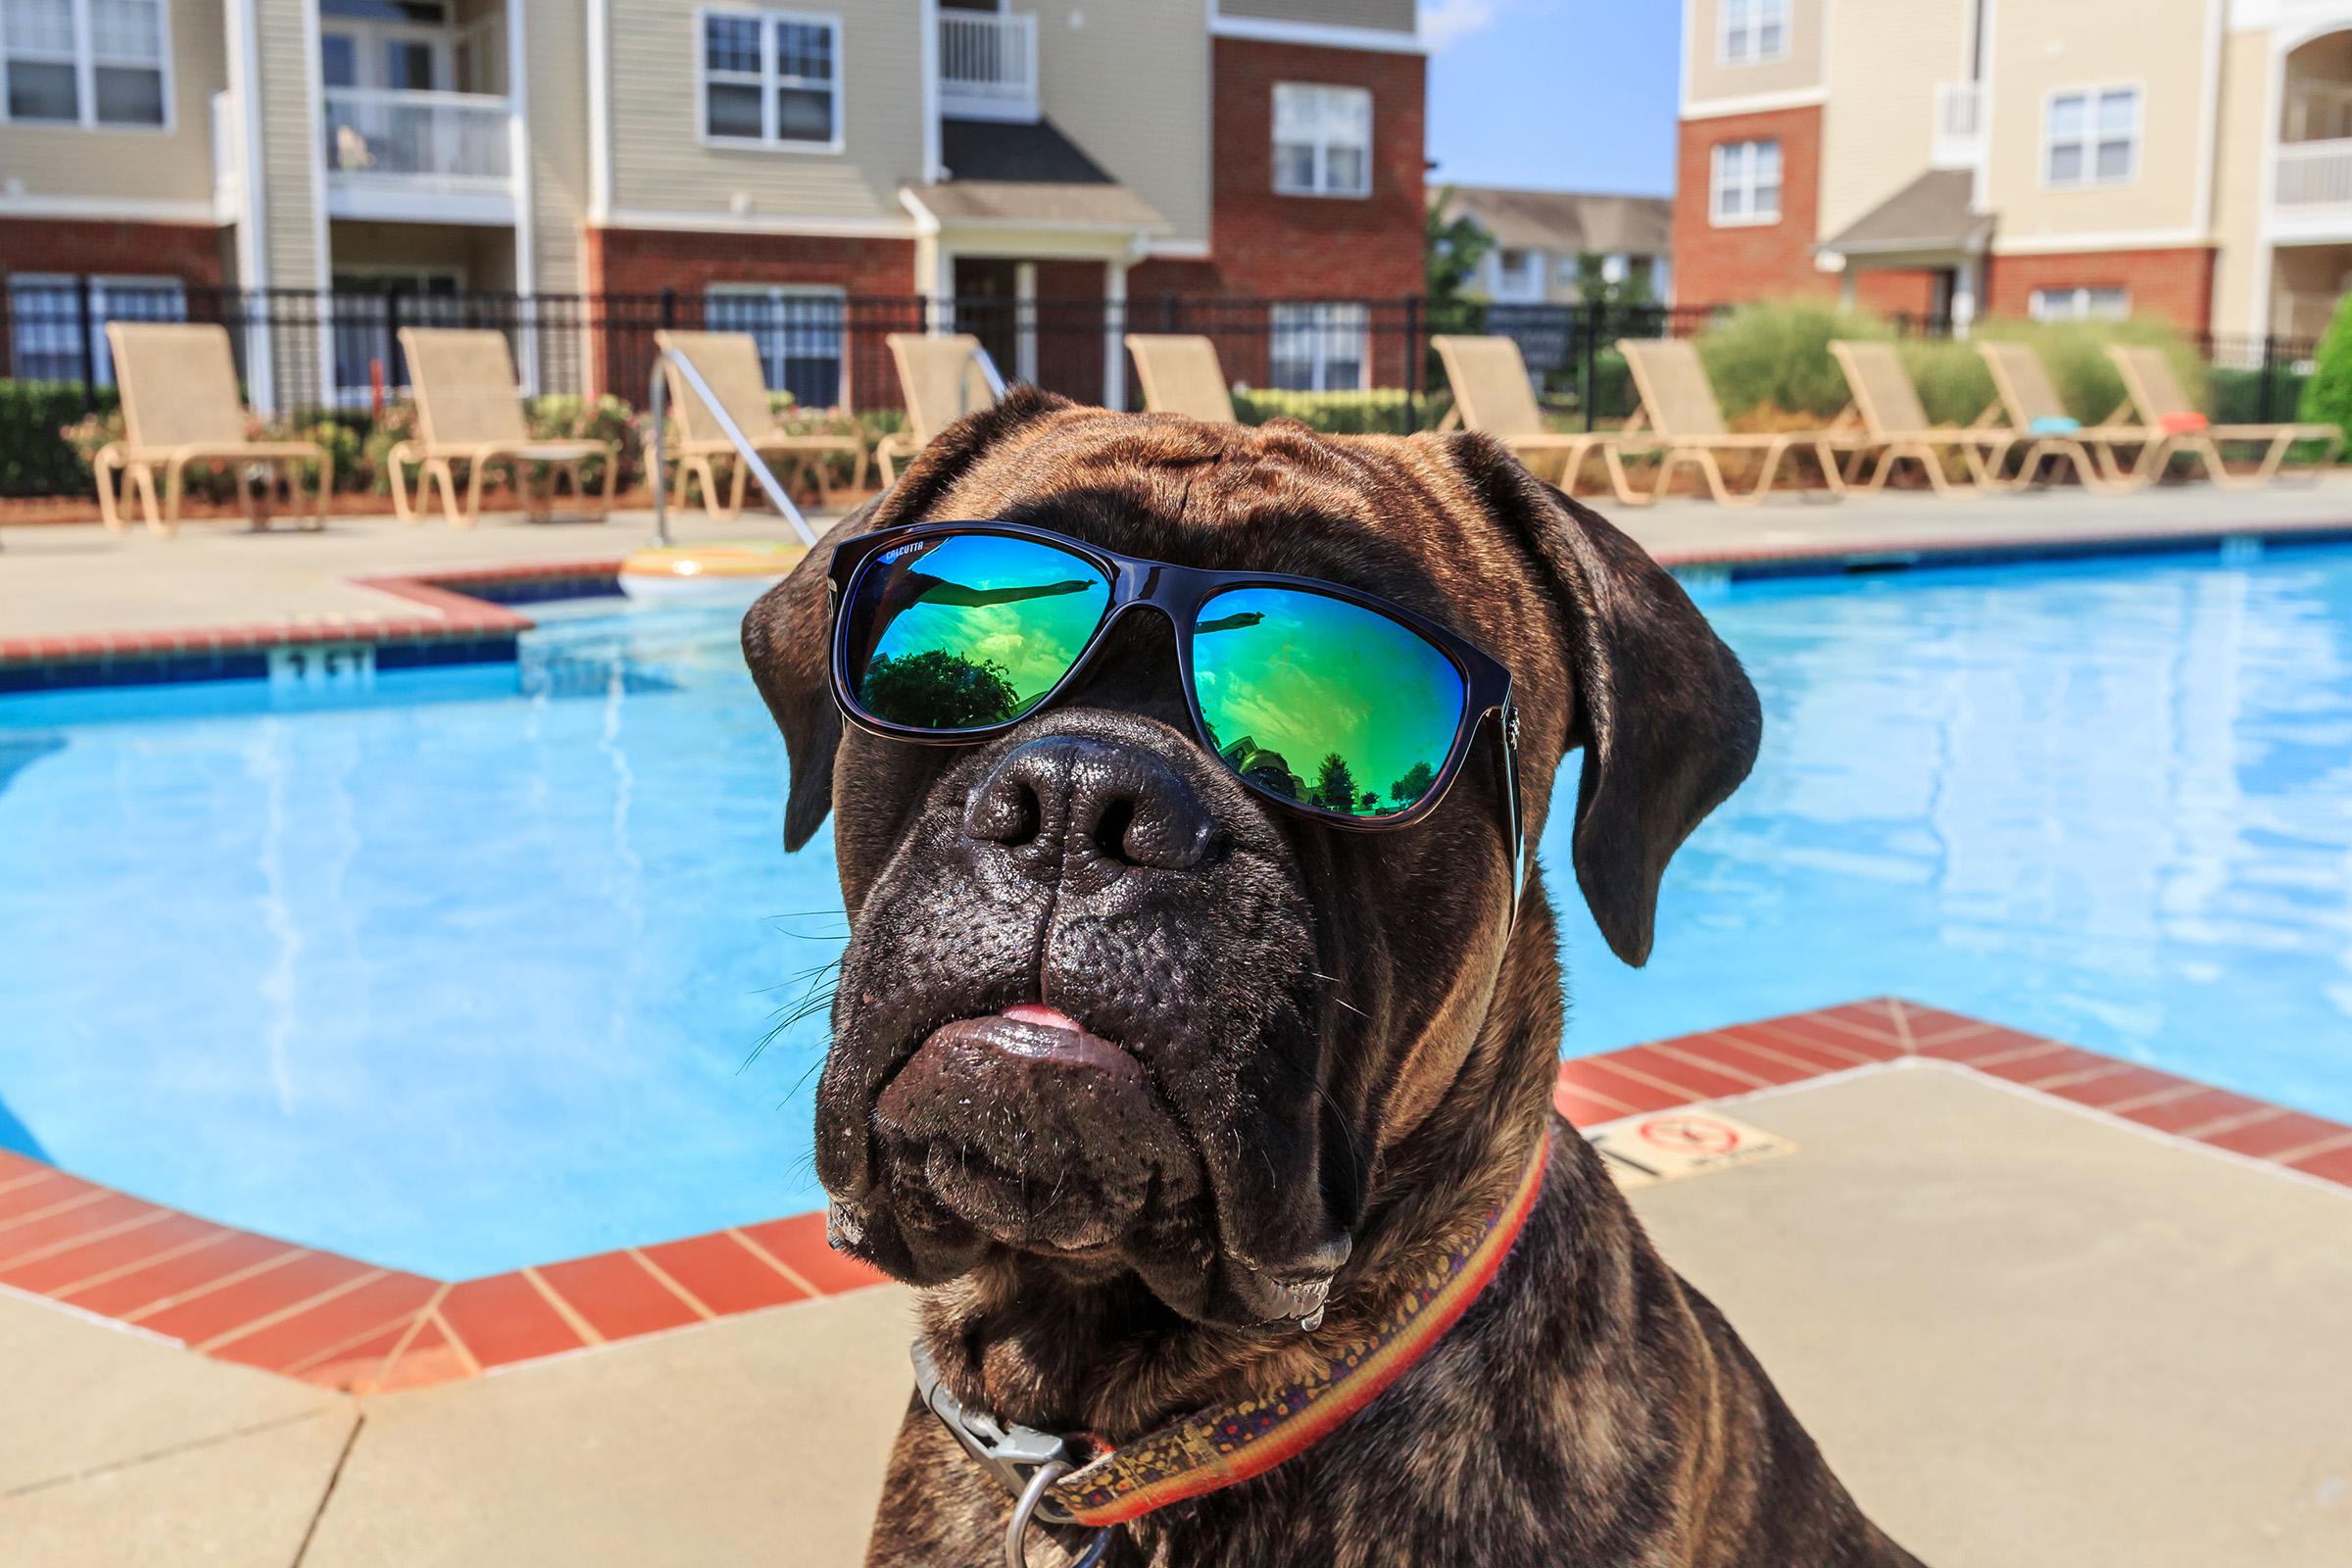 Stay cool with your furry companion at Bradford Park in Rock Hill, South Carolina